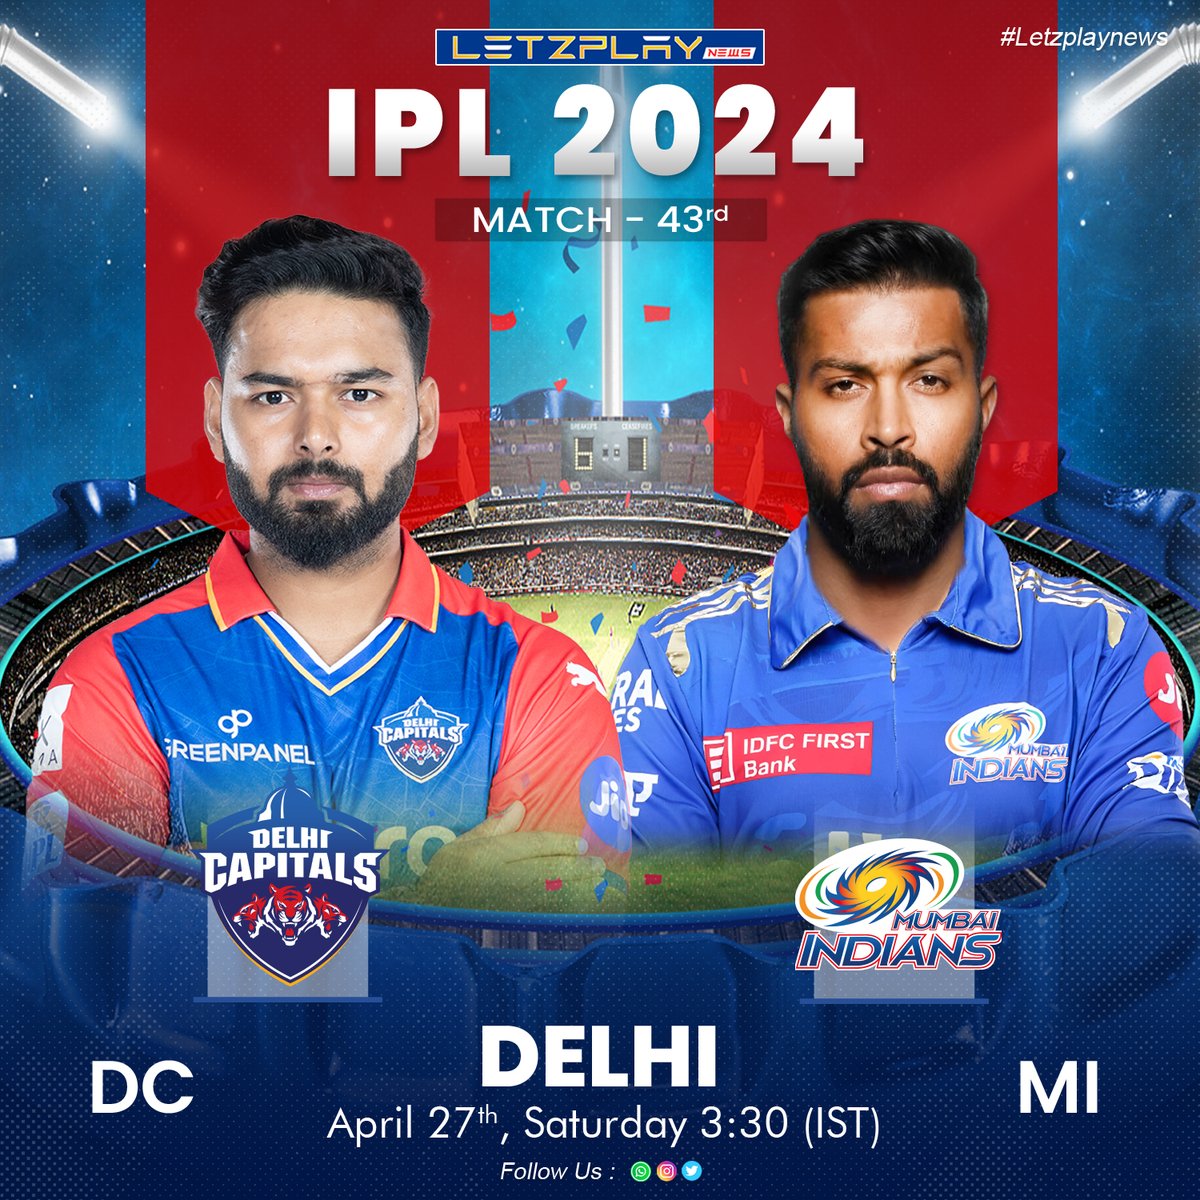 🔥 Exciting match alert! Delhi Capitals go head-to-head against Mumbai Indians today at 3:30 PM IST on April 27th, 2024, in Delhi! 🌟
-
-
-
-
#DCvsMI #IPL2024 #CricketFever #PredictToWin #ContestAlert #DelhiCapitals #MumbaiIndians #CricketMania #MatchDayMadness 🎉🏏